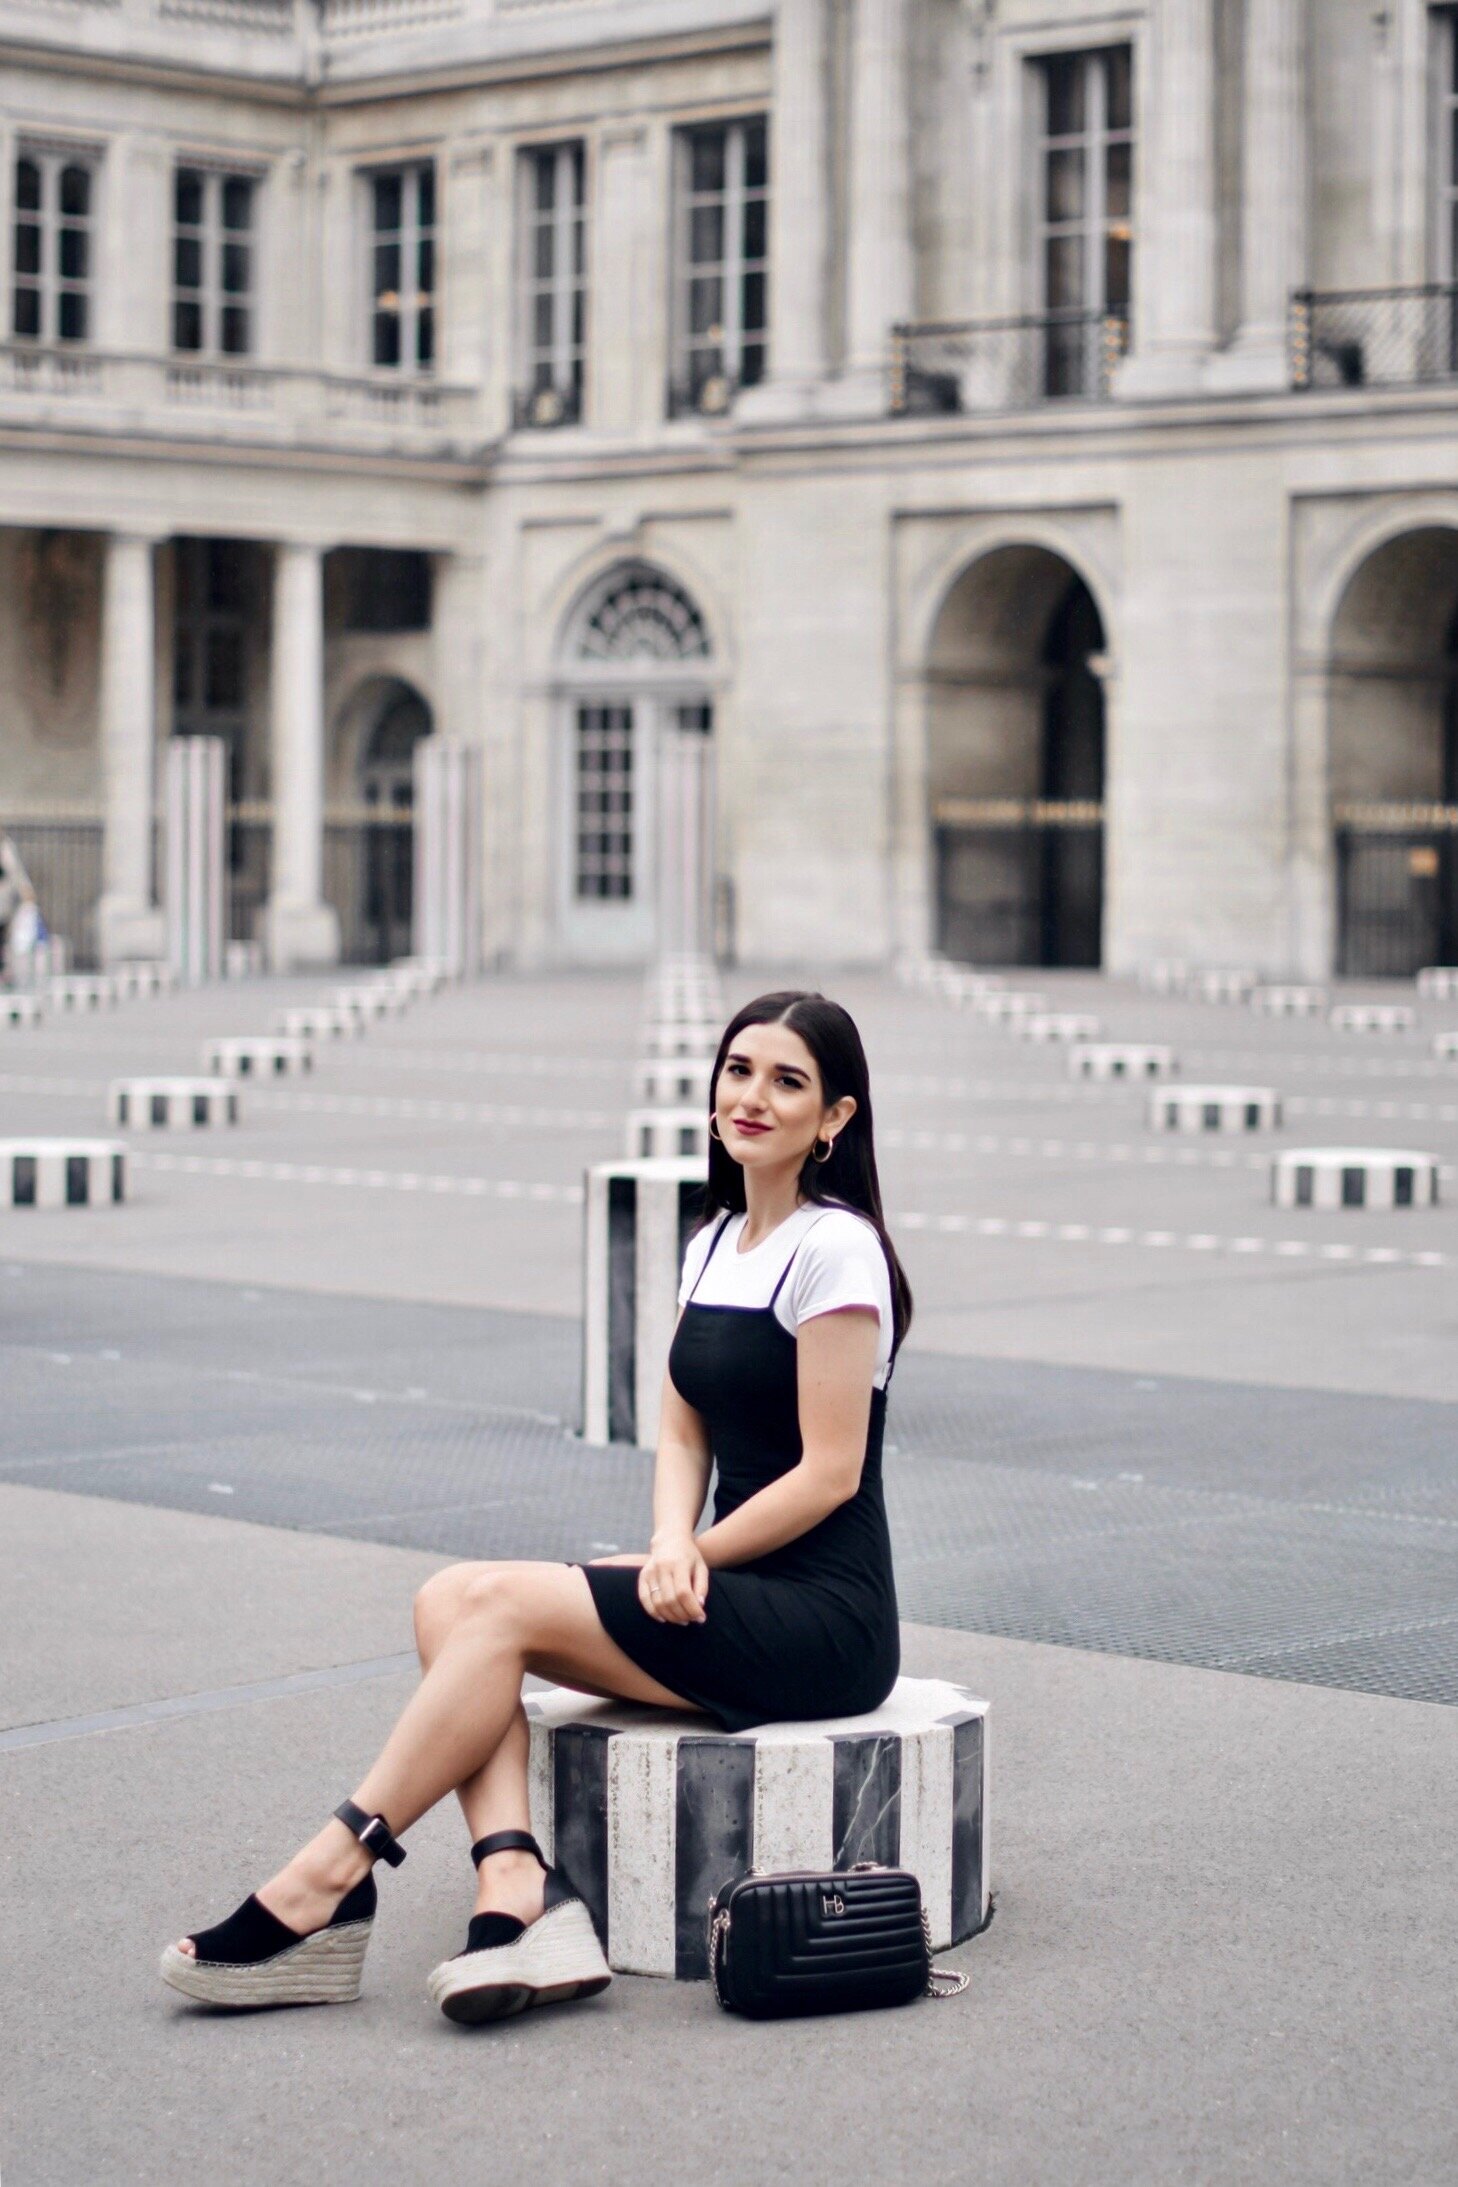 My Top 10 Favorite Spots In Paris Esther Santer NYC Street Style Blogger Travel Outfit What To Do Where To Go Tourist Attractions Saint Germain Moulin Rouge Black and White Pillars Eiffel Tower Versailles Laduree France Saint Michel Bag Recommendation.jpg